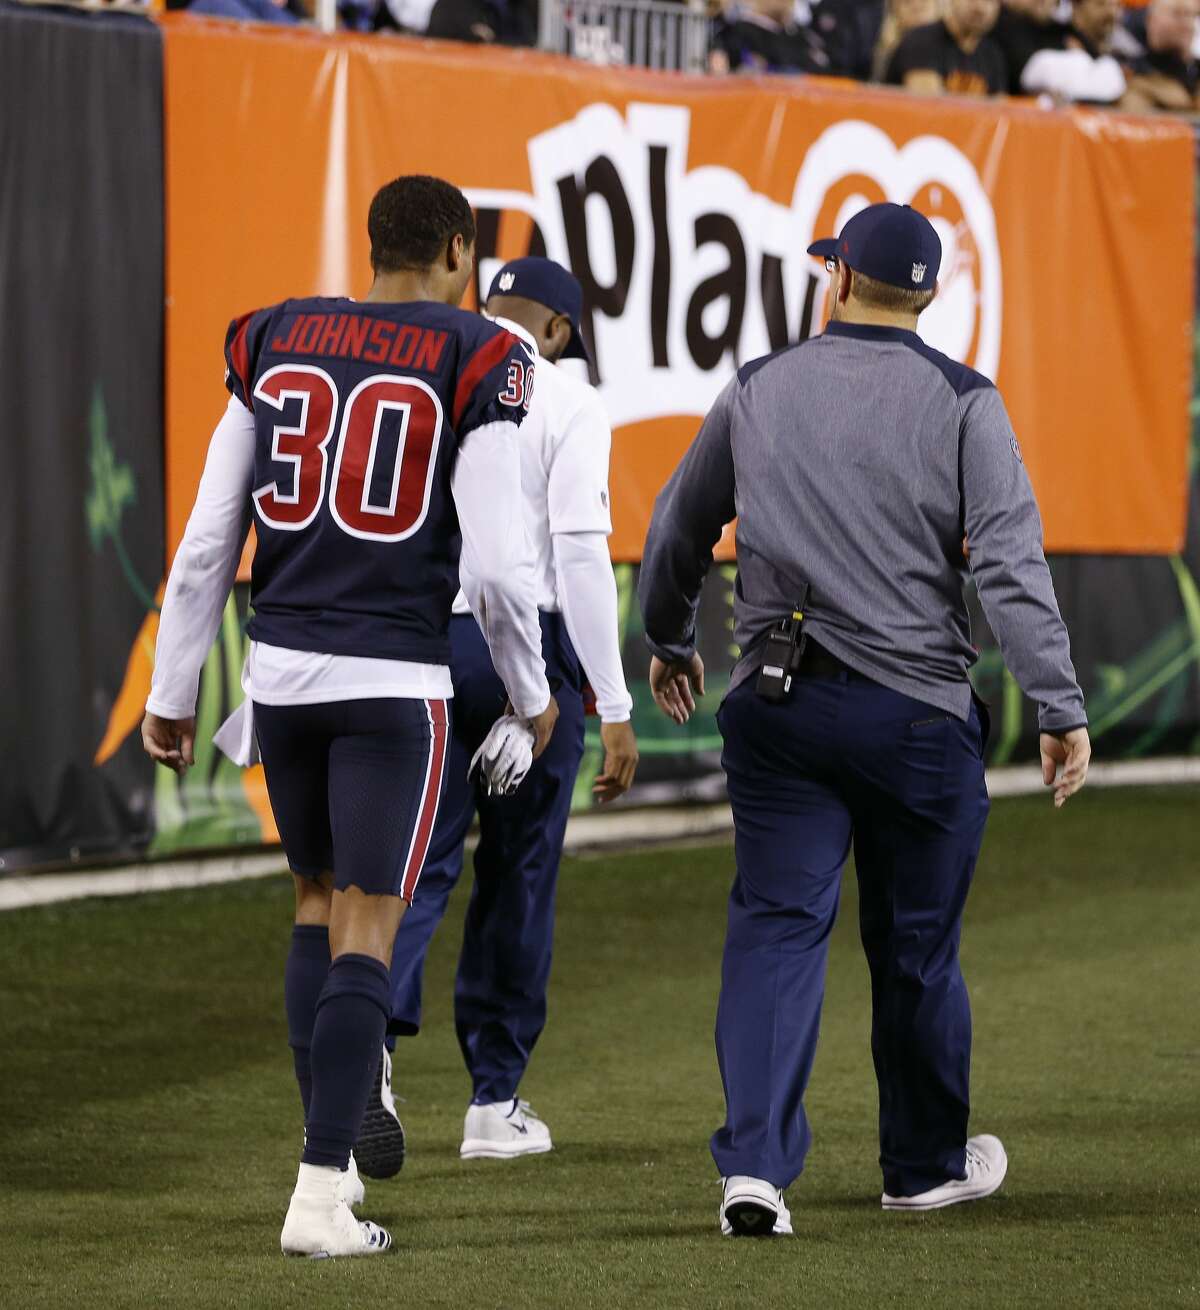 Houston Texans cornerback Kevin Johnson (30) heads to the locker room after injuring his shoulder during the third quarter of an NFL football game at Paul Brown Stadium on Thursday, Sept. 14, 2017, in Cincinnati. ( Brett Coomer / Houston Chronicle )